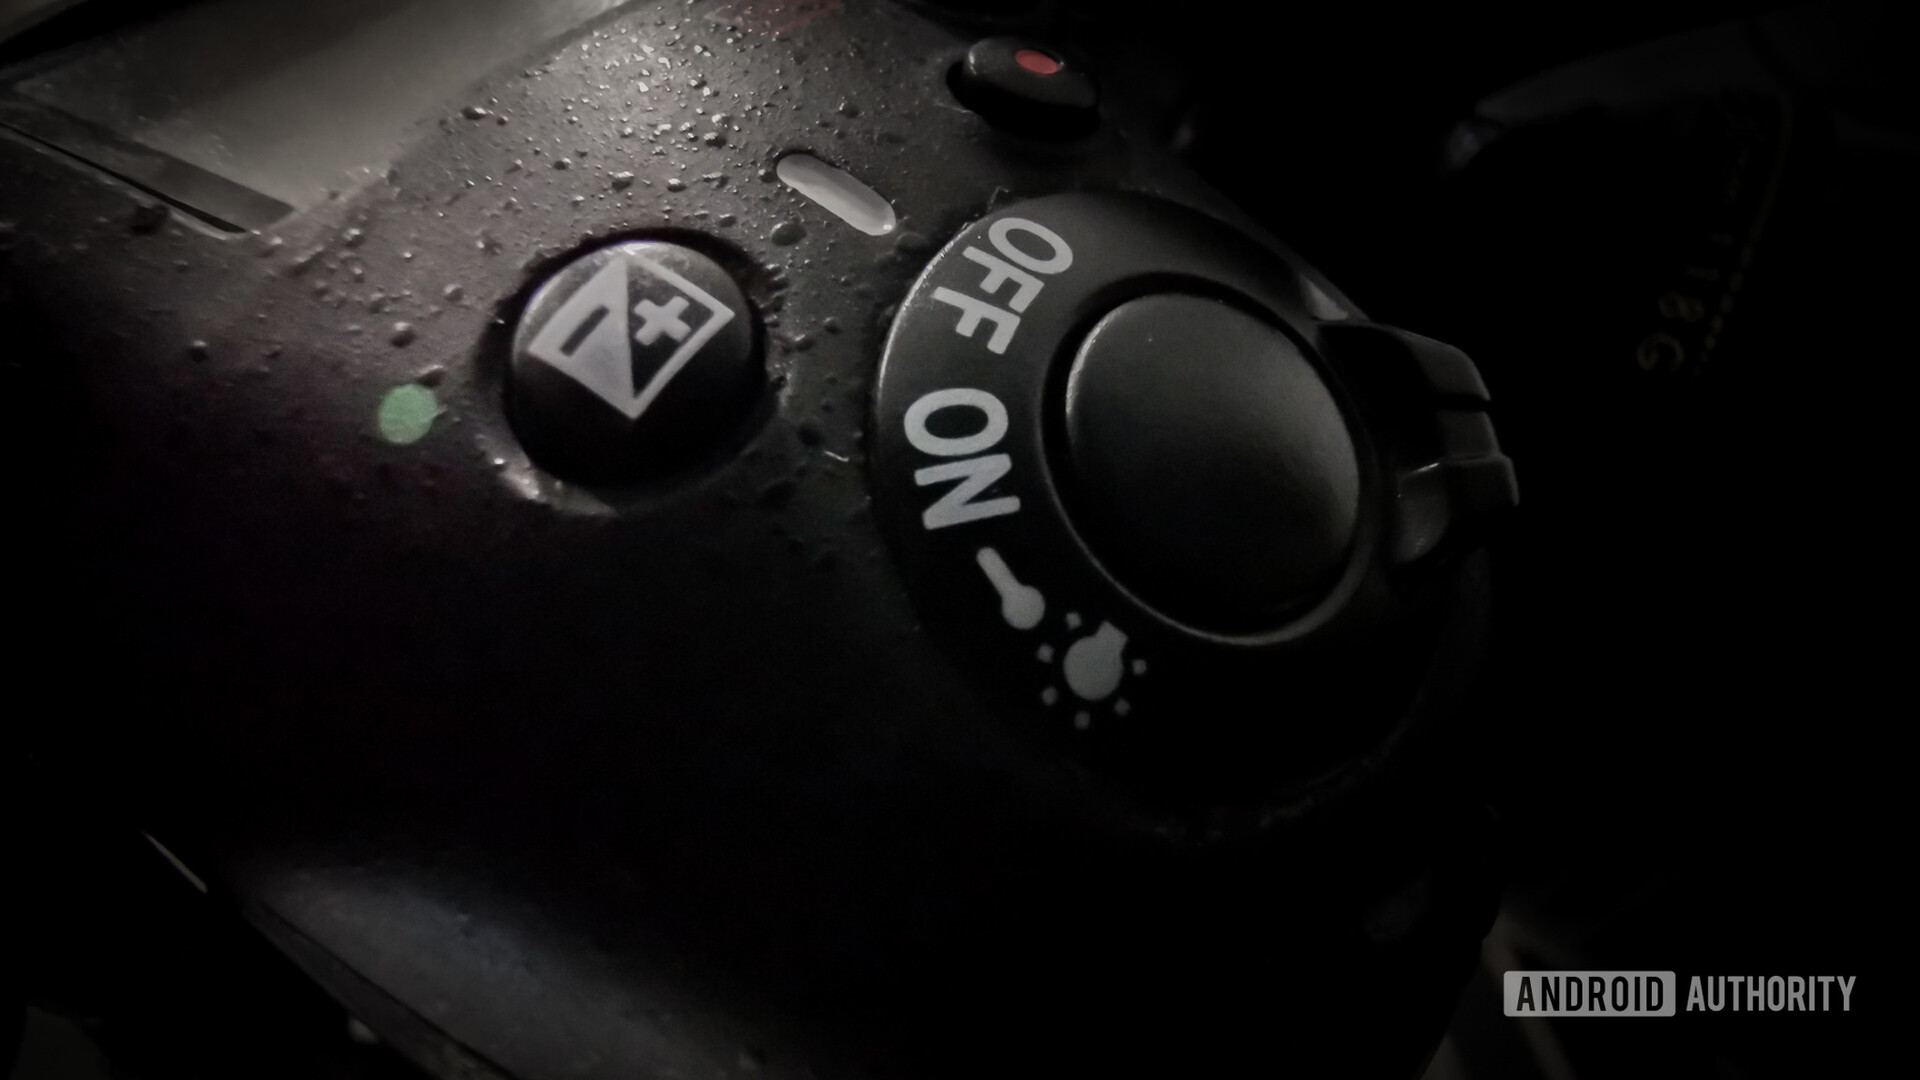 DSLR shutter button, power toggle, and EV button.